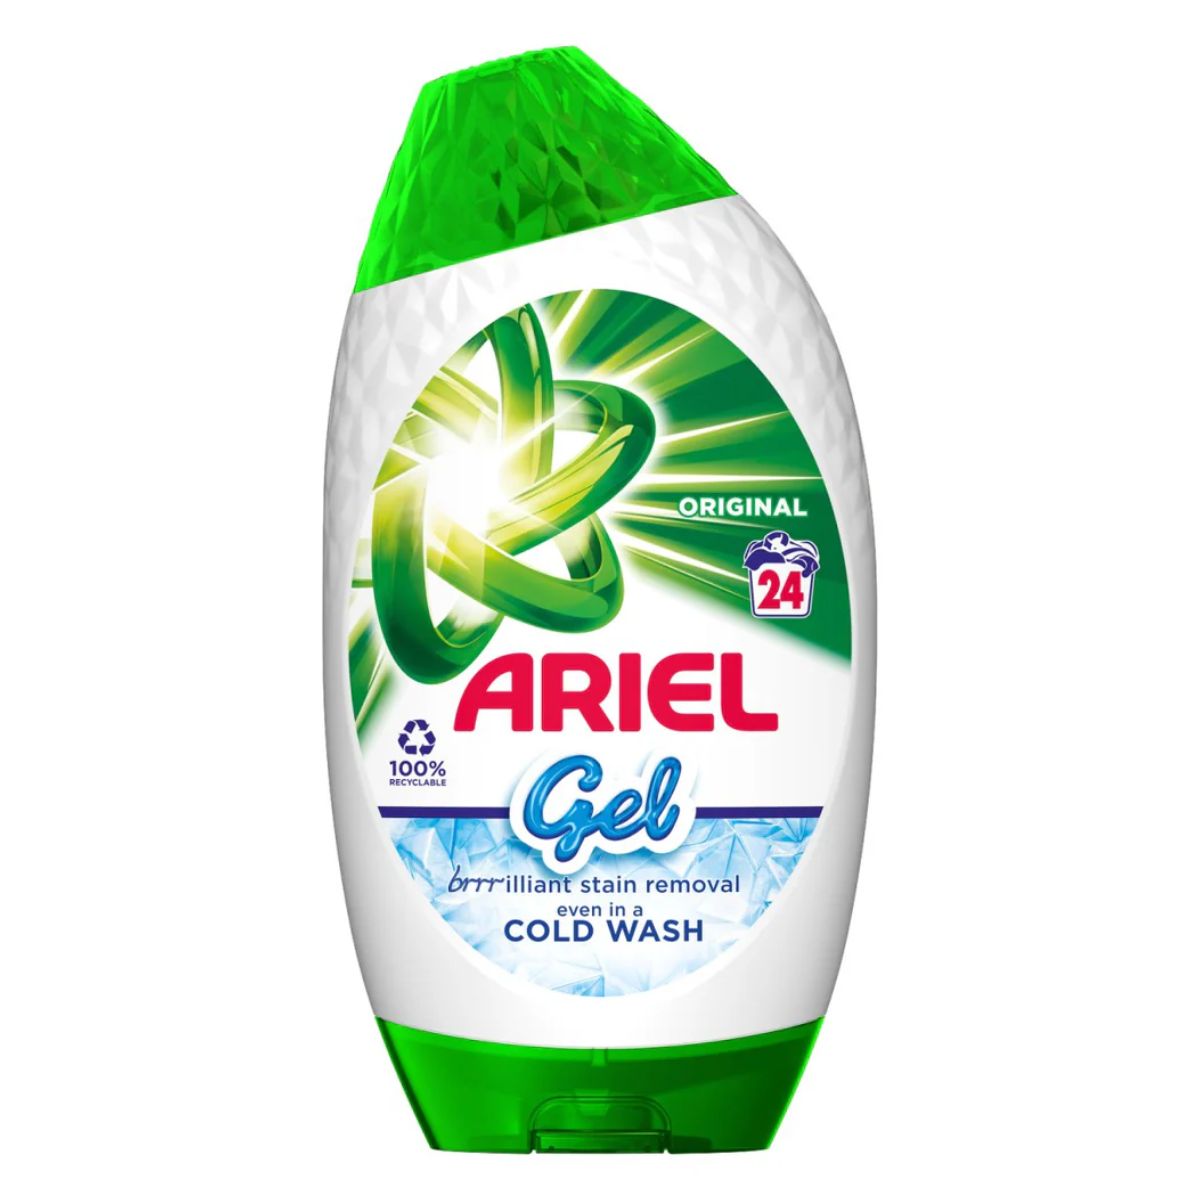 A bottle of Ariel - Original Washing Gel - 840ml with graphics emphasizing its effectiveness in cold washes.